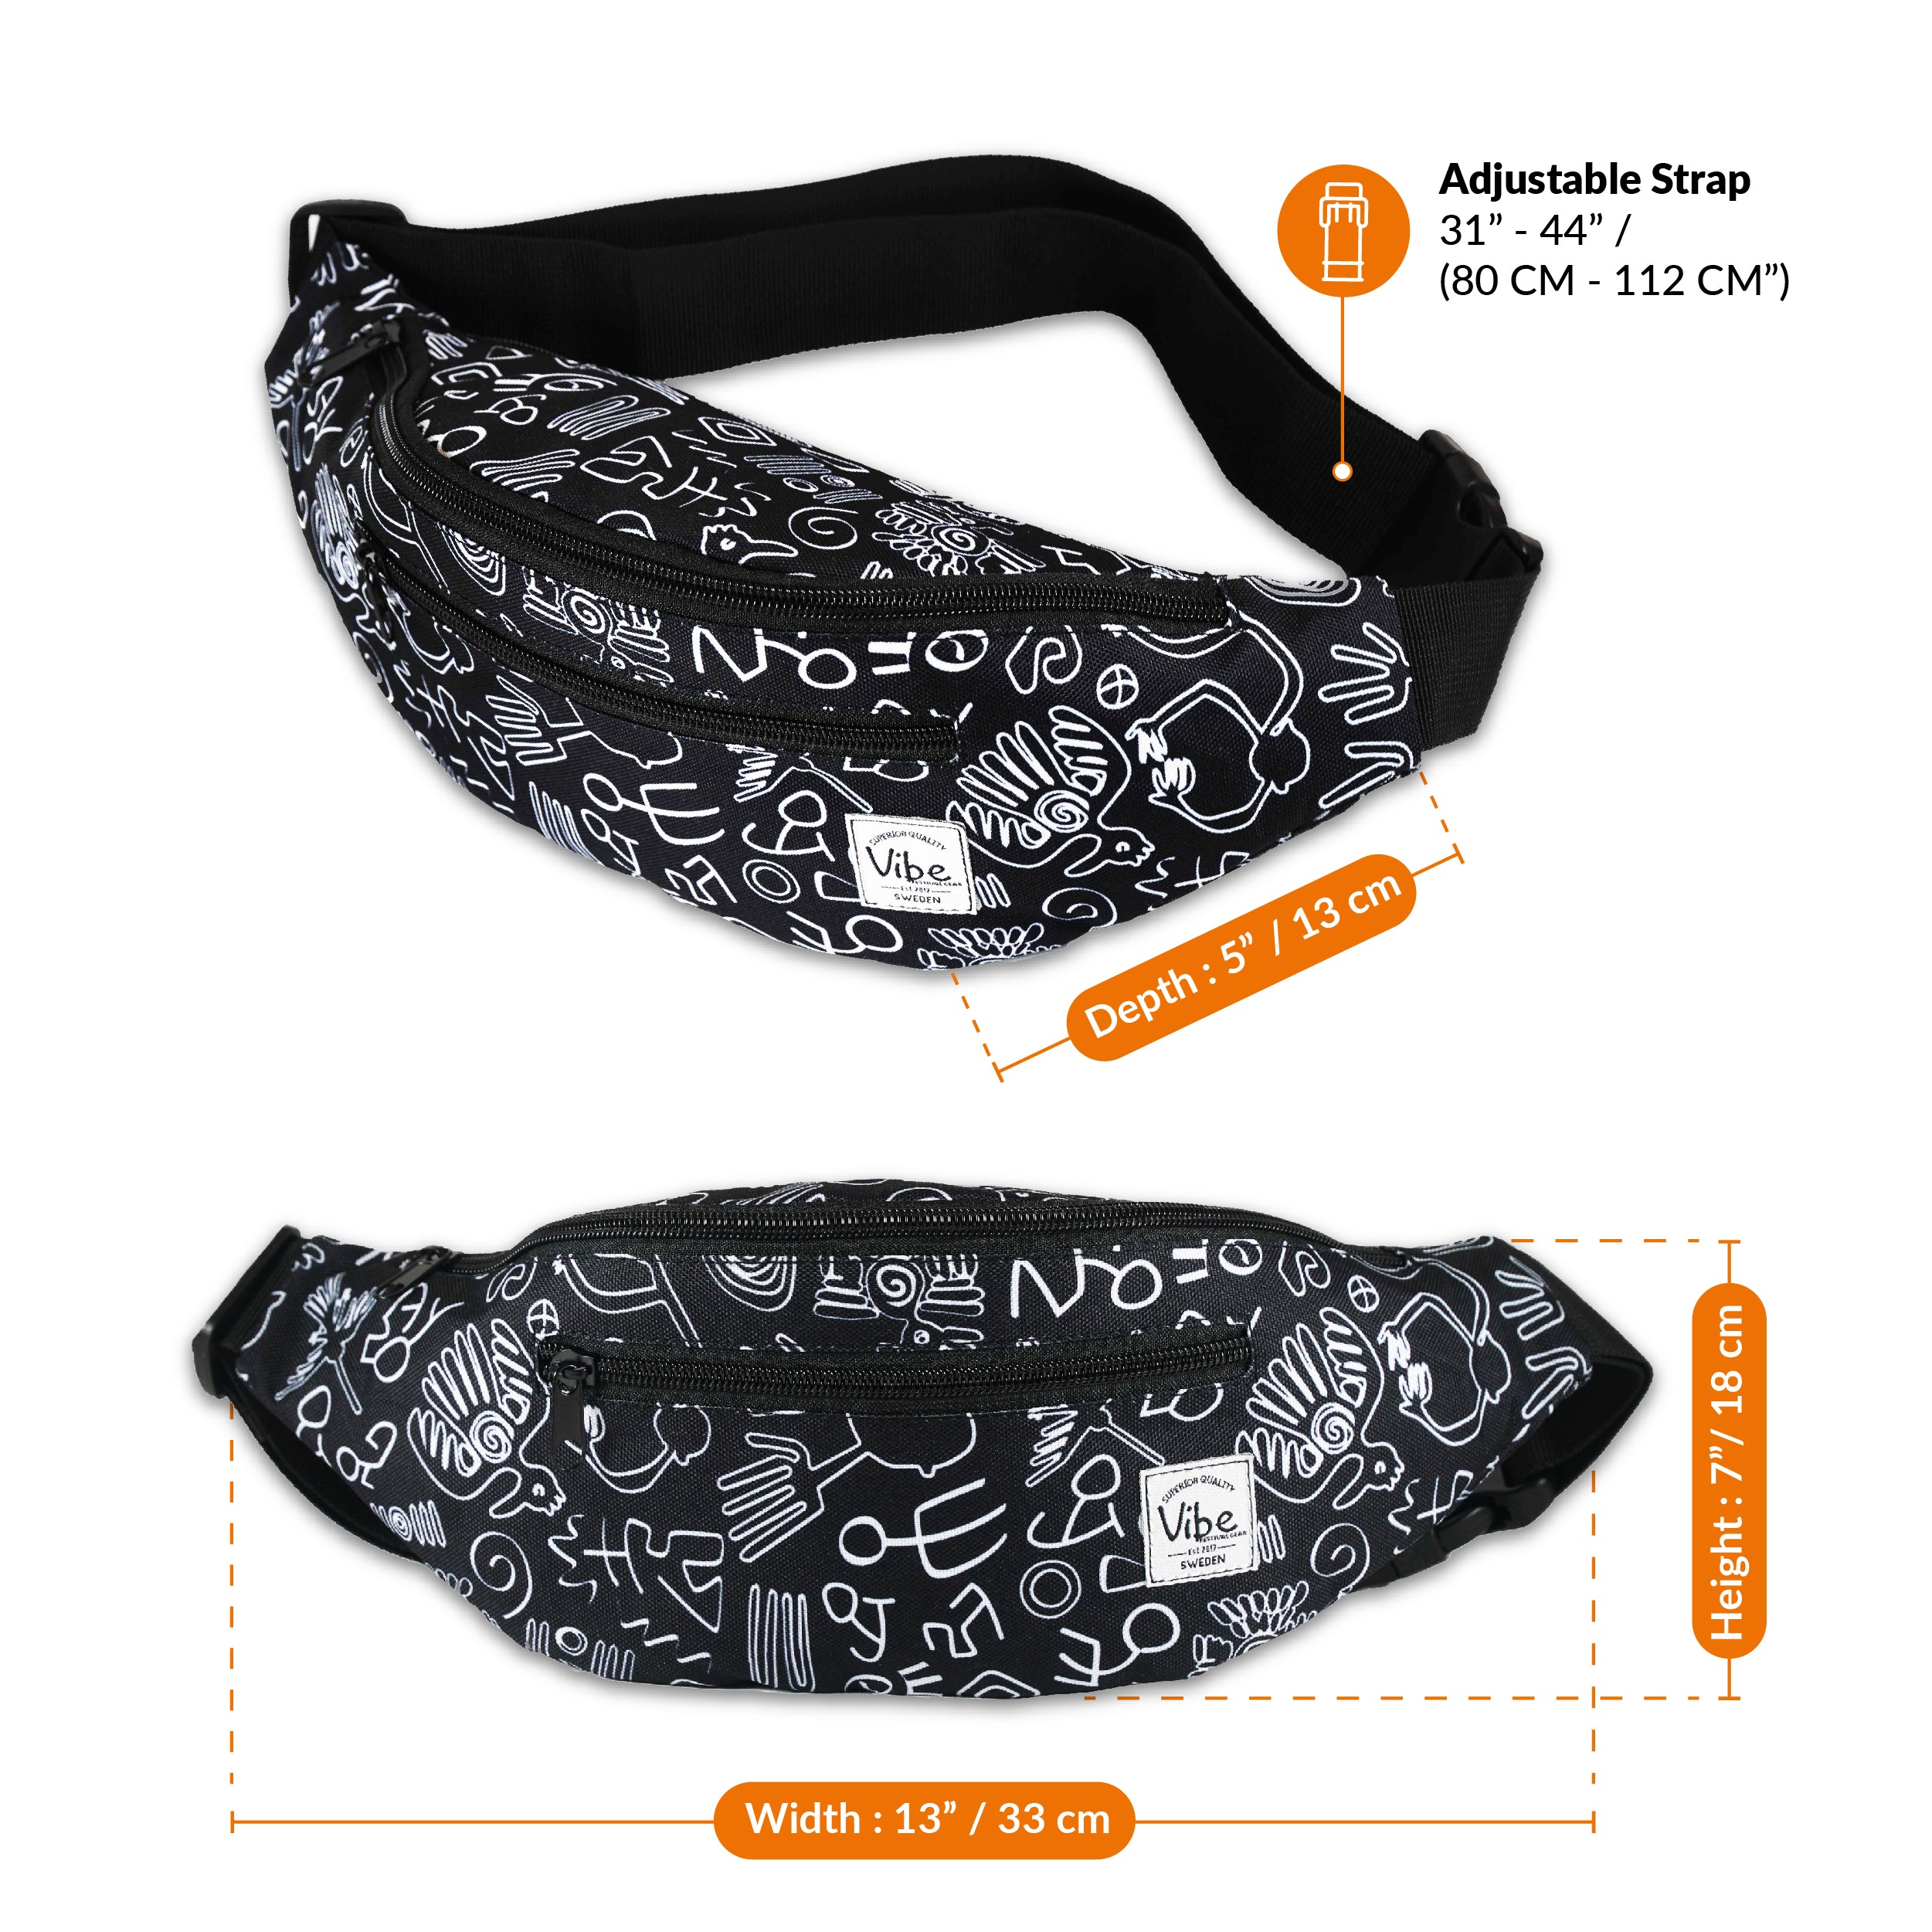 Tribal Pattern Fanny Pack (Sand) – Comfortable Culture